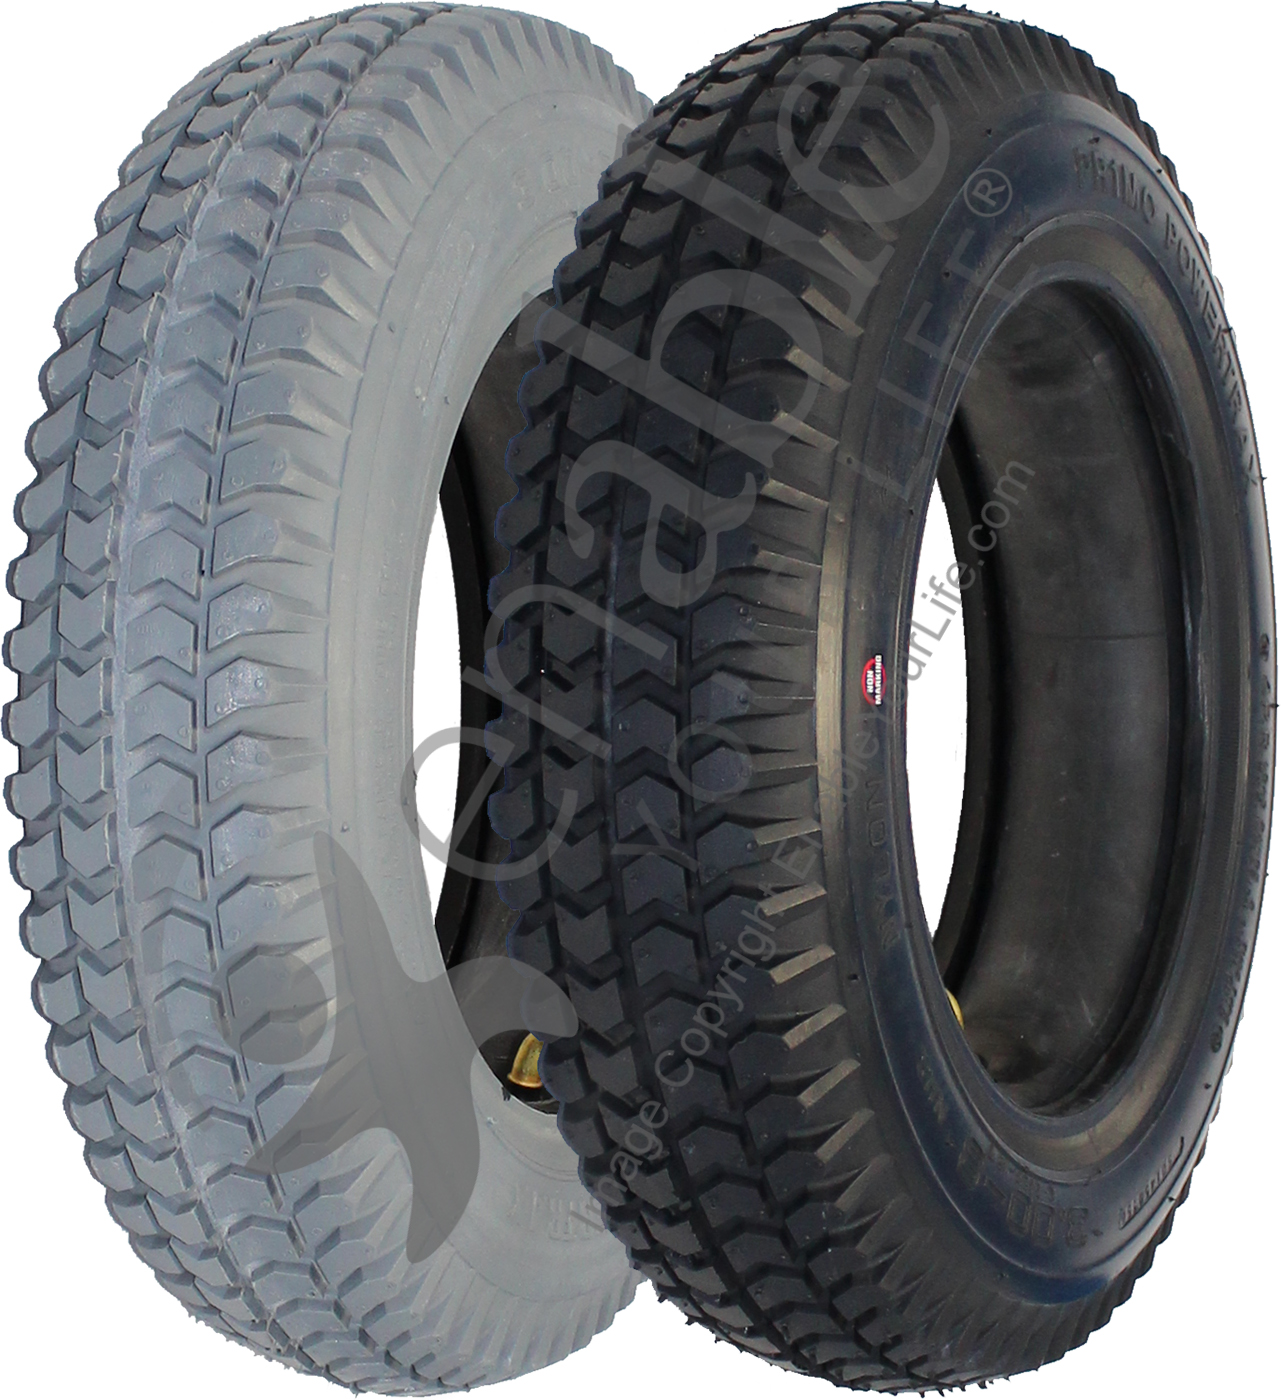 14 x 3 in. (3.00-8) Primo Powertrax Wheelchair Tire - showing both black and gray colors